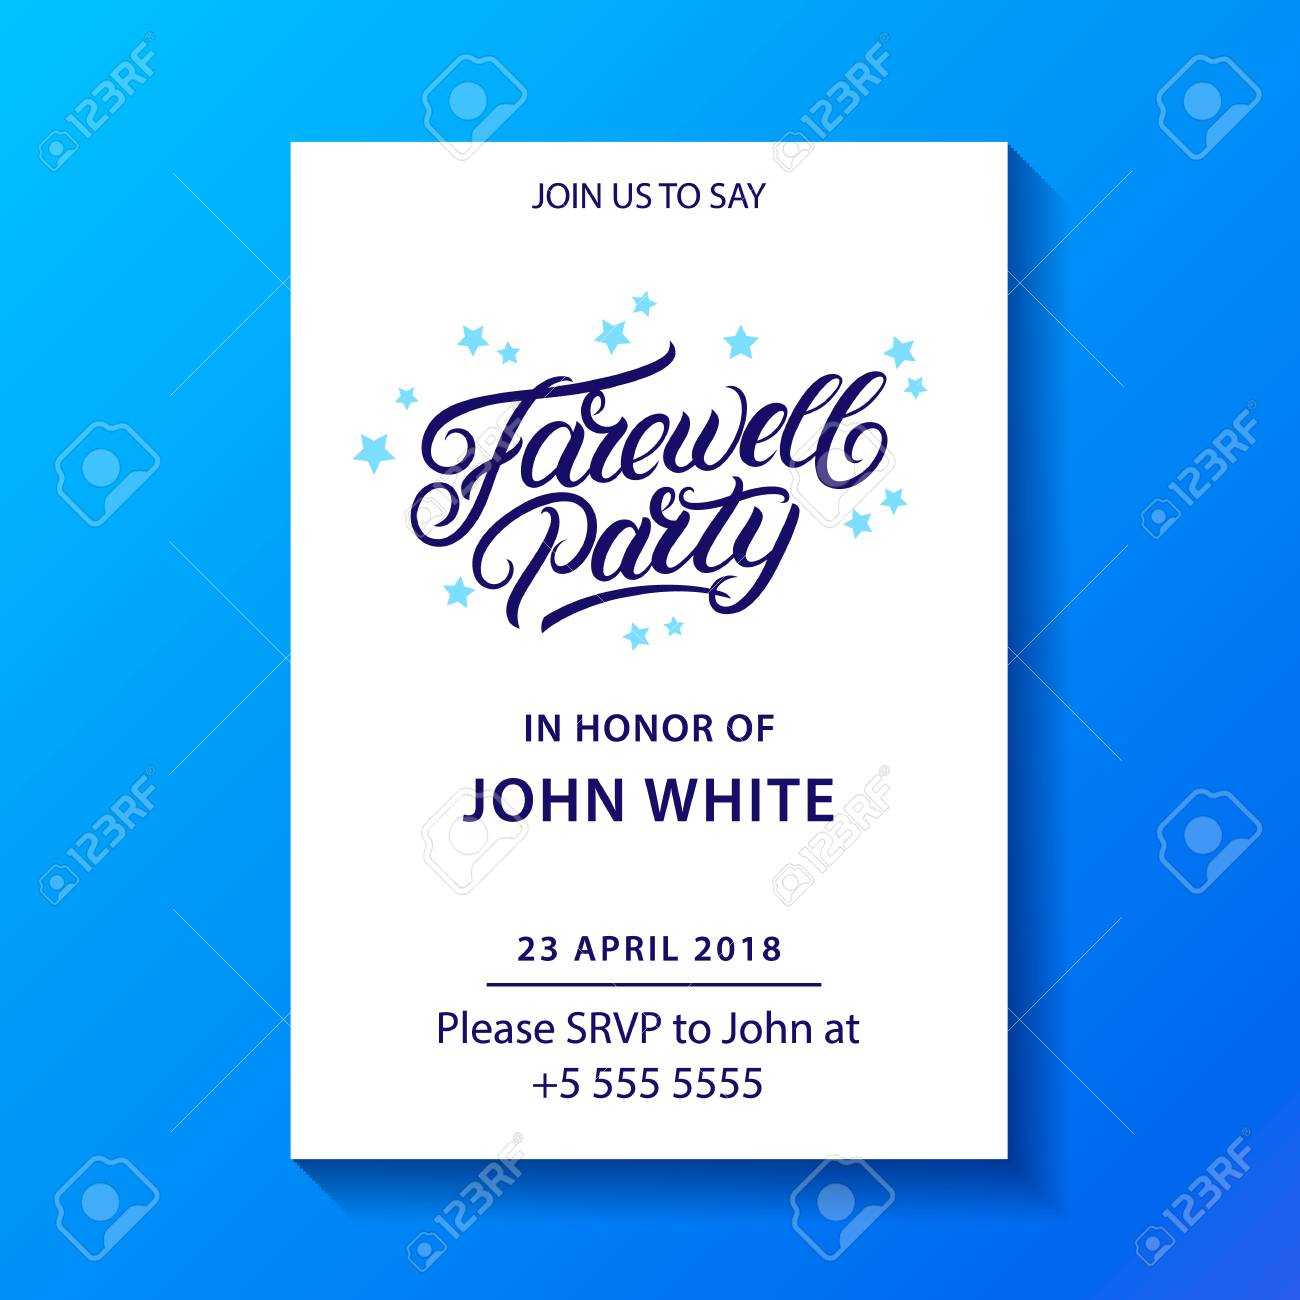 032 Template Ideas Farewell Party Invitations Invitation For Within Farewell Invitation Card Template